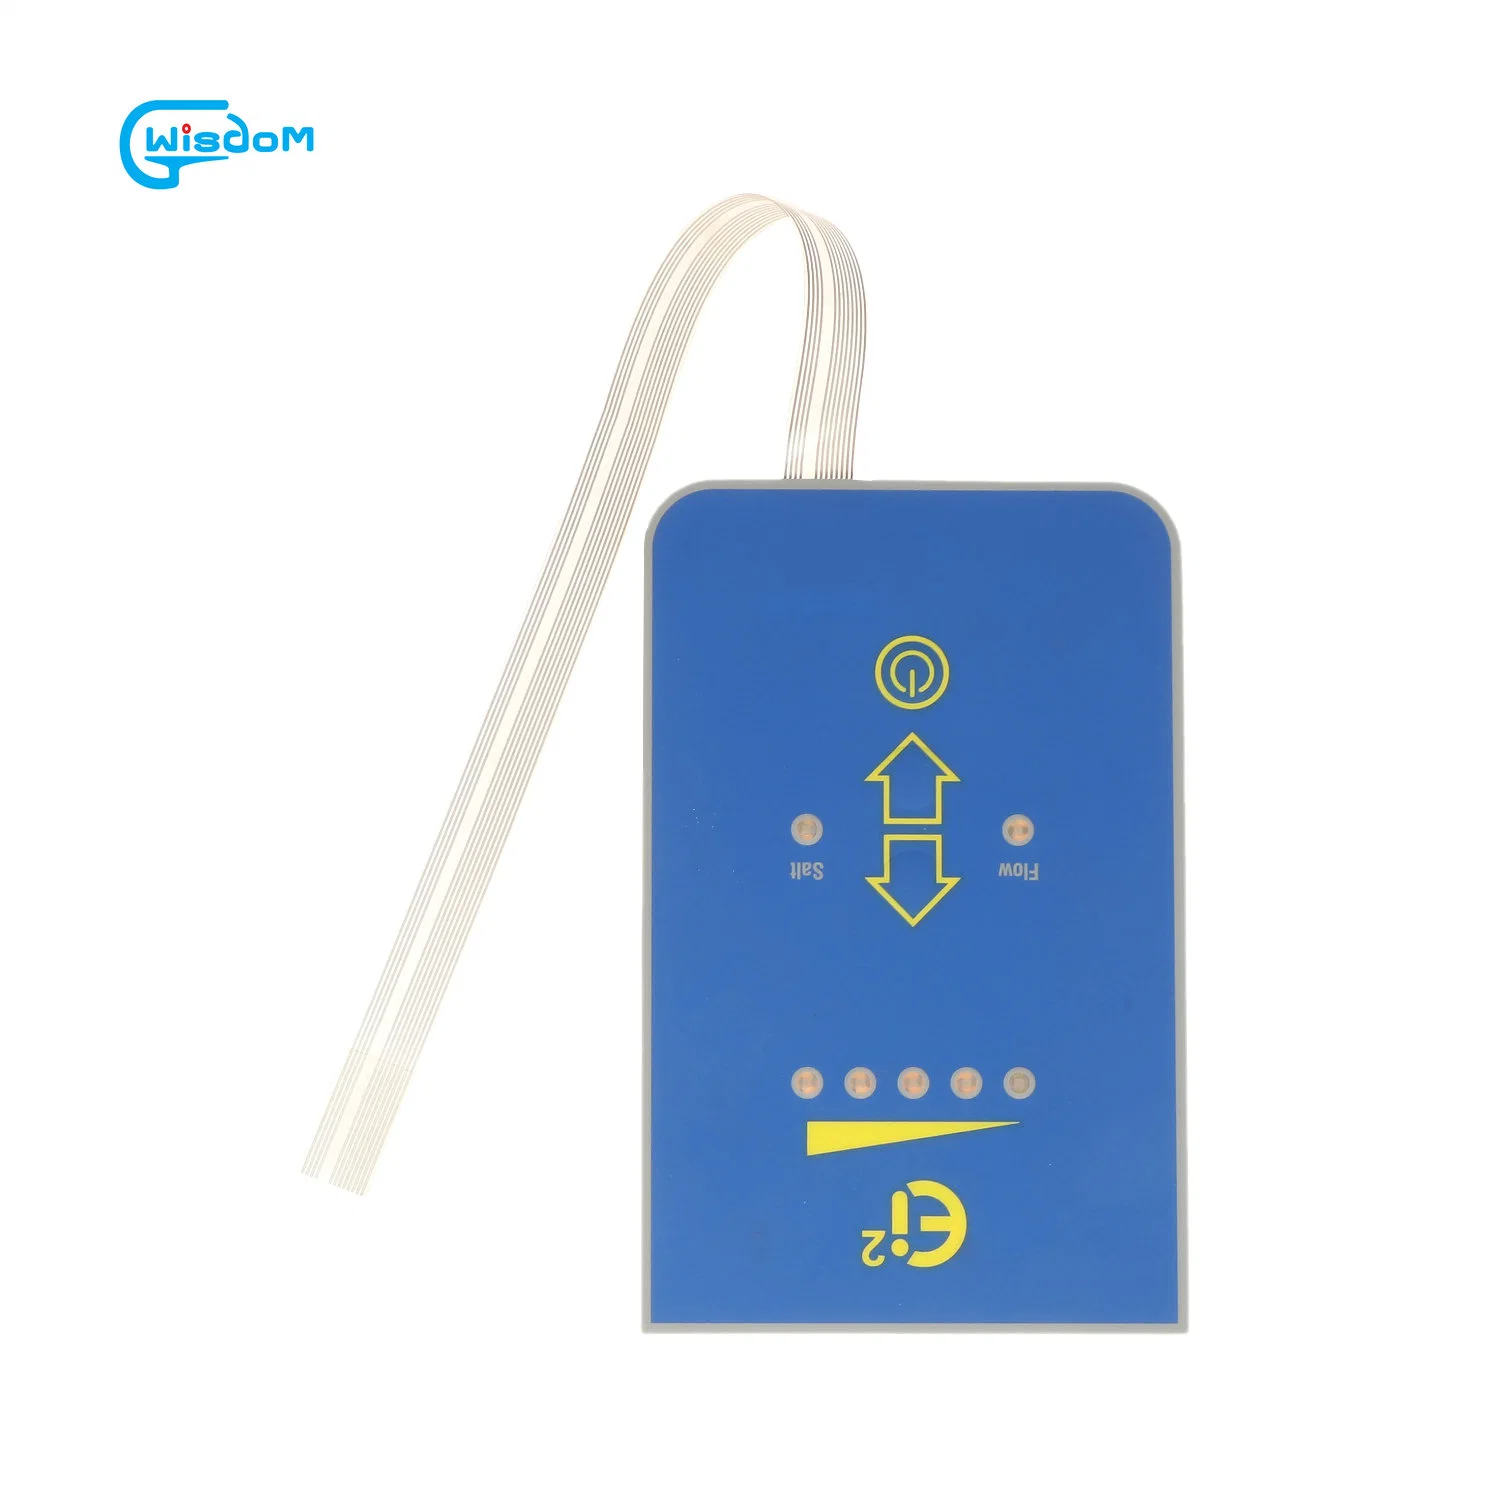 Customized Design Waterproof Membrane Switch with LED Embedded Display